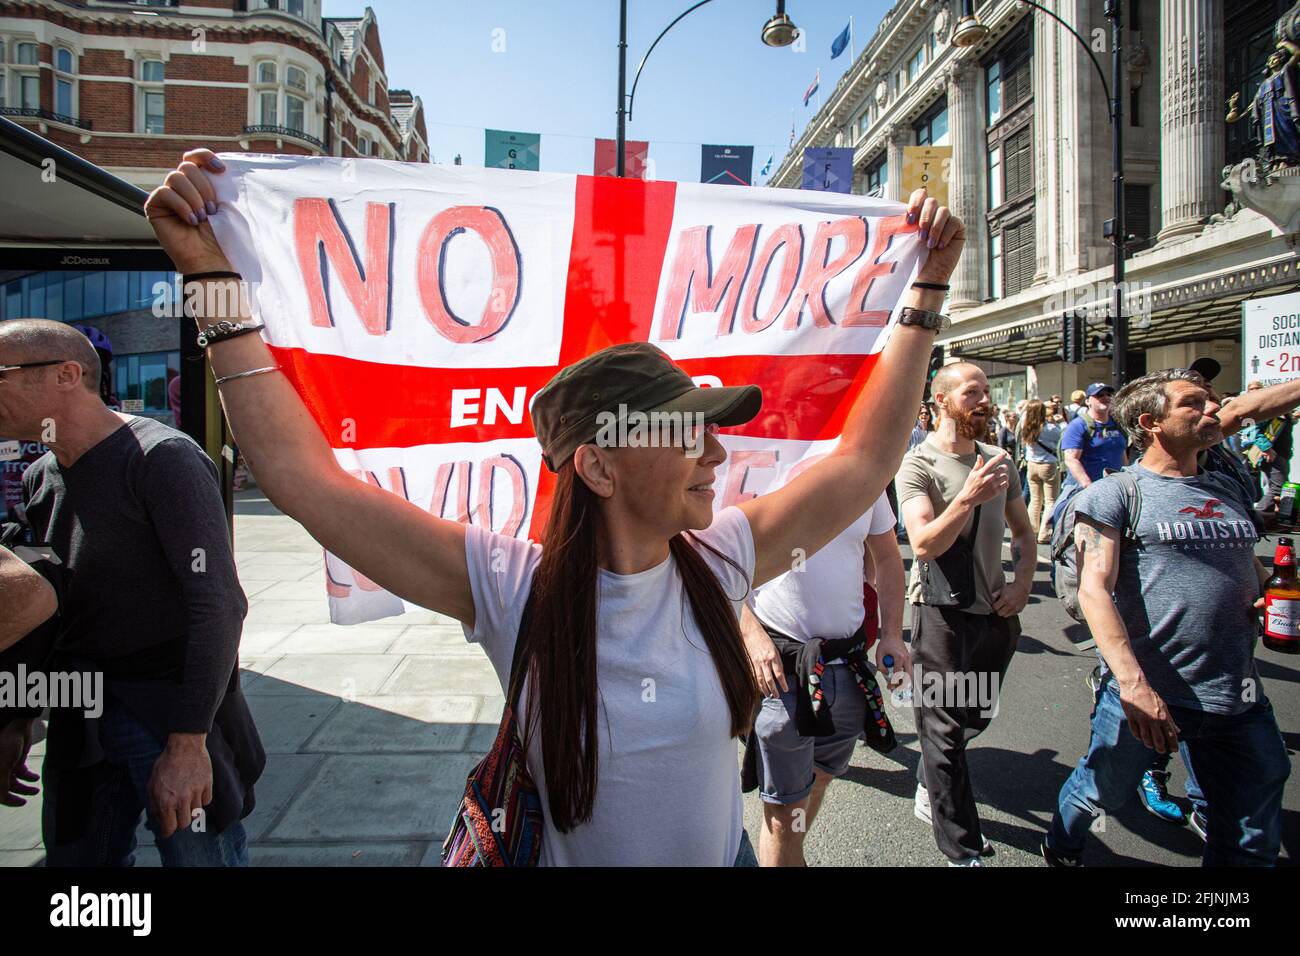 April 24, 2021, London, England, United Kingdom: Woman carries St George's flag with 'No more Covid lies' written on it during an anti-lockdown 'Unite Stock Photo